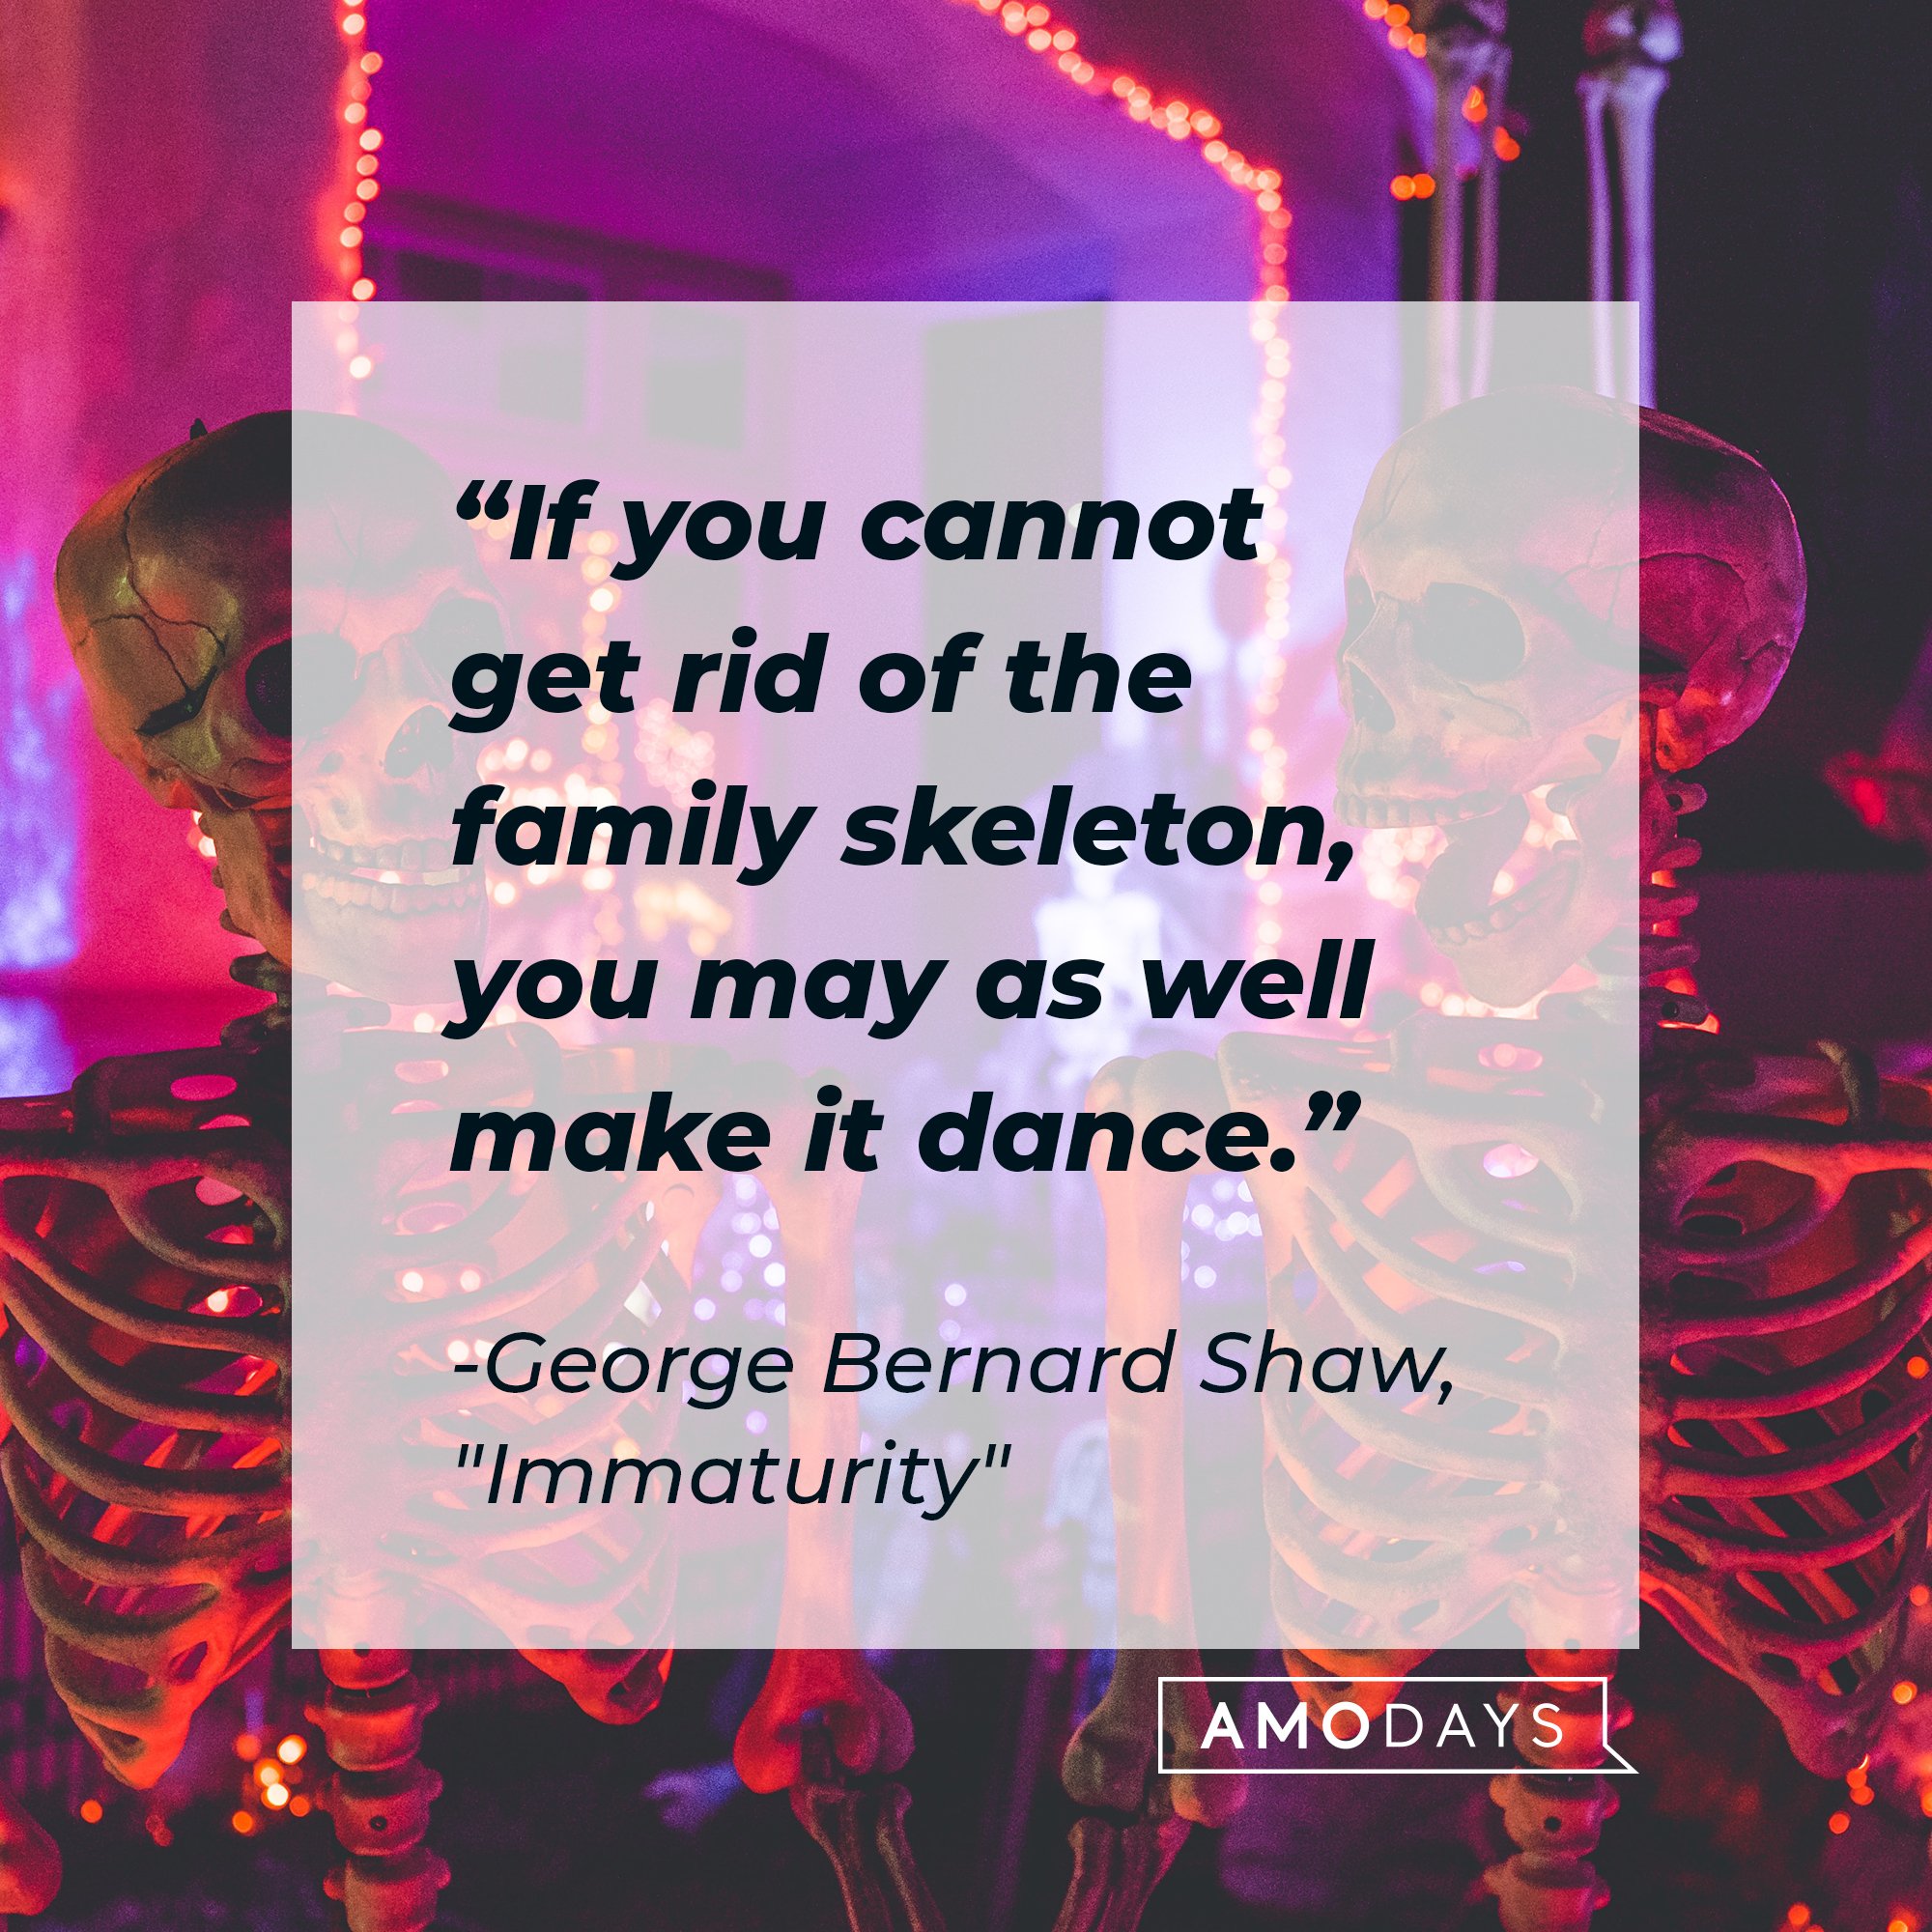 George Bernard Shaw’s quote from "Immaturity": "If you cannot get rid of the family skeleton, you may as well make it dance." | Image: AmoDays